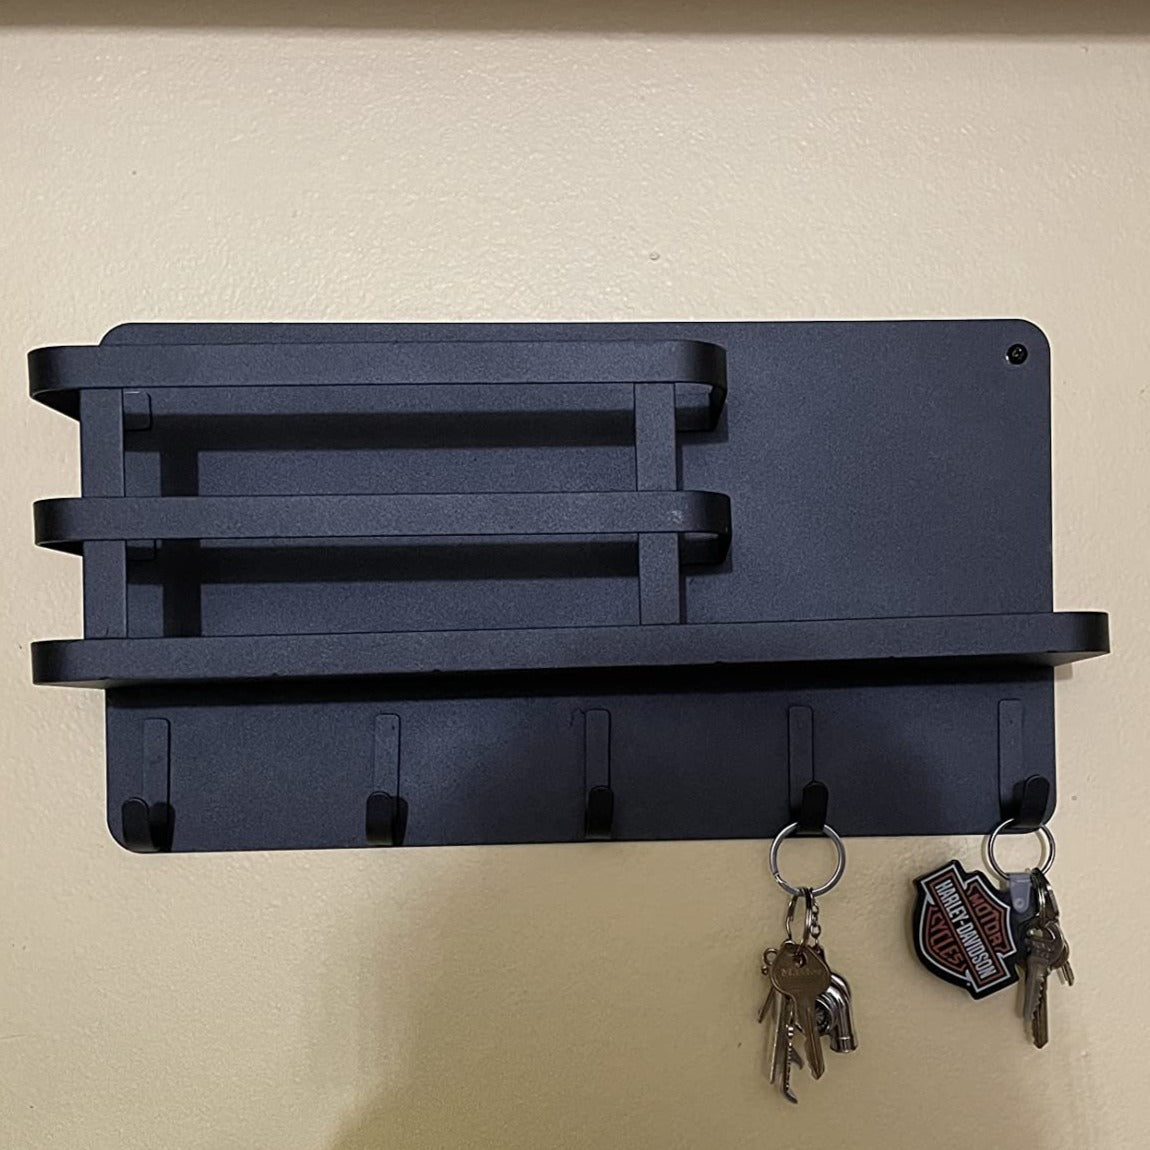 Key Holder for Wall, Mail Holder for Wall, Wall Mounted Mail Organizer, Metal Floating Shelf with 5 Hooks